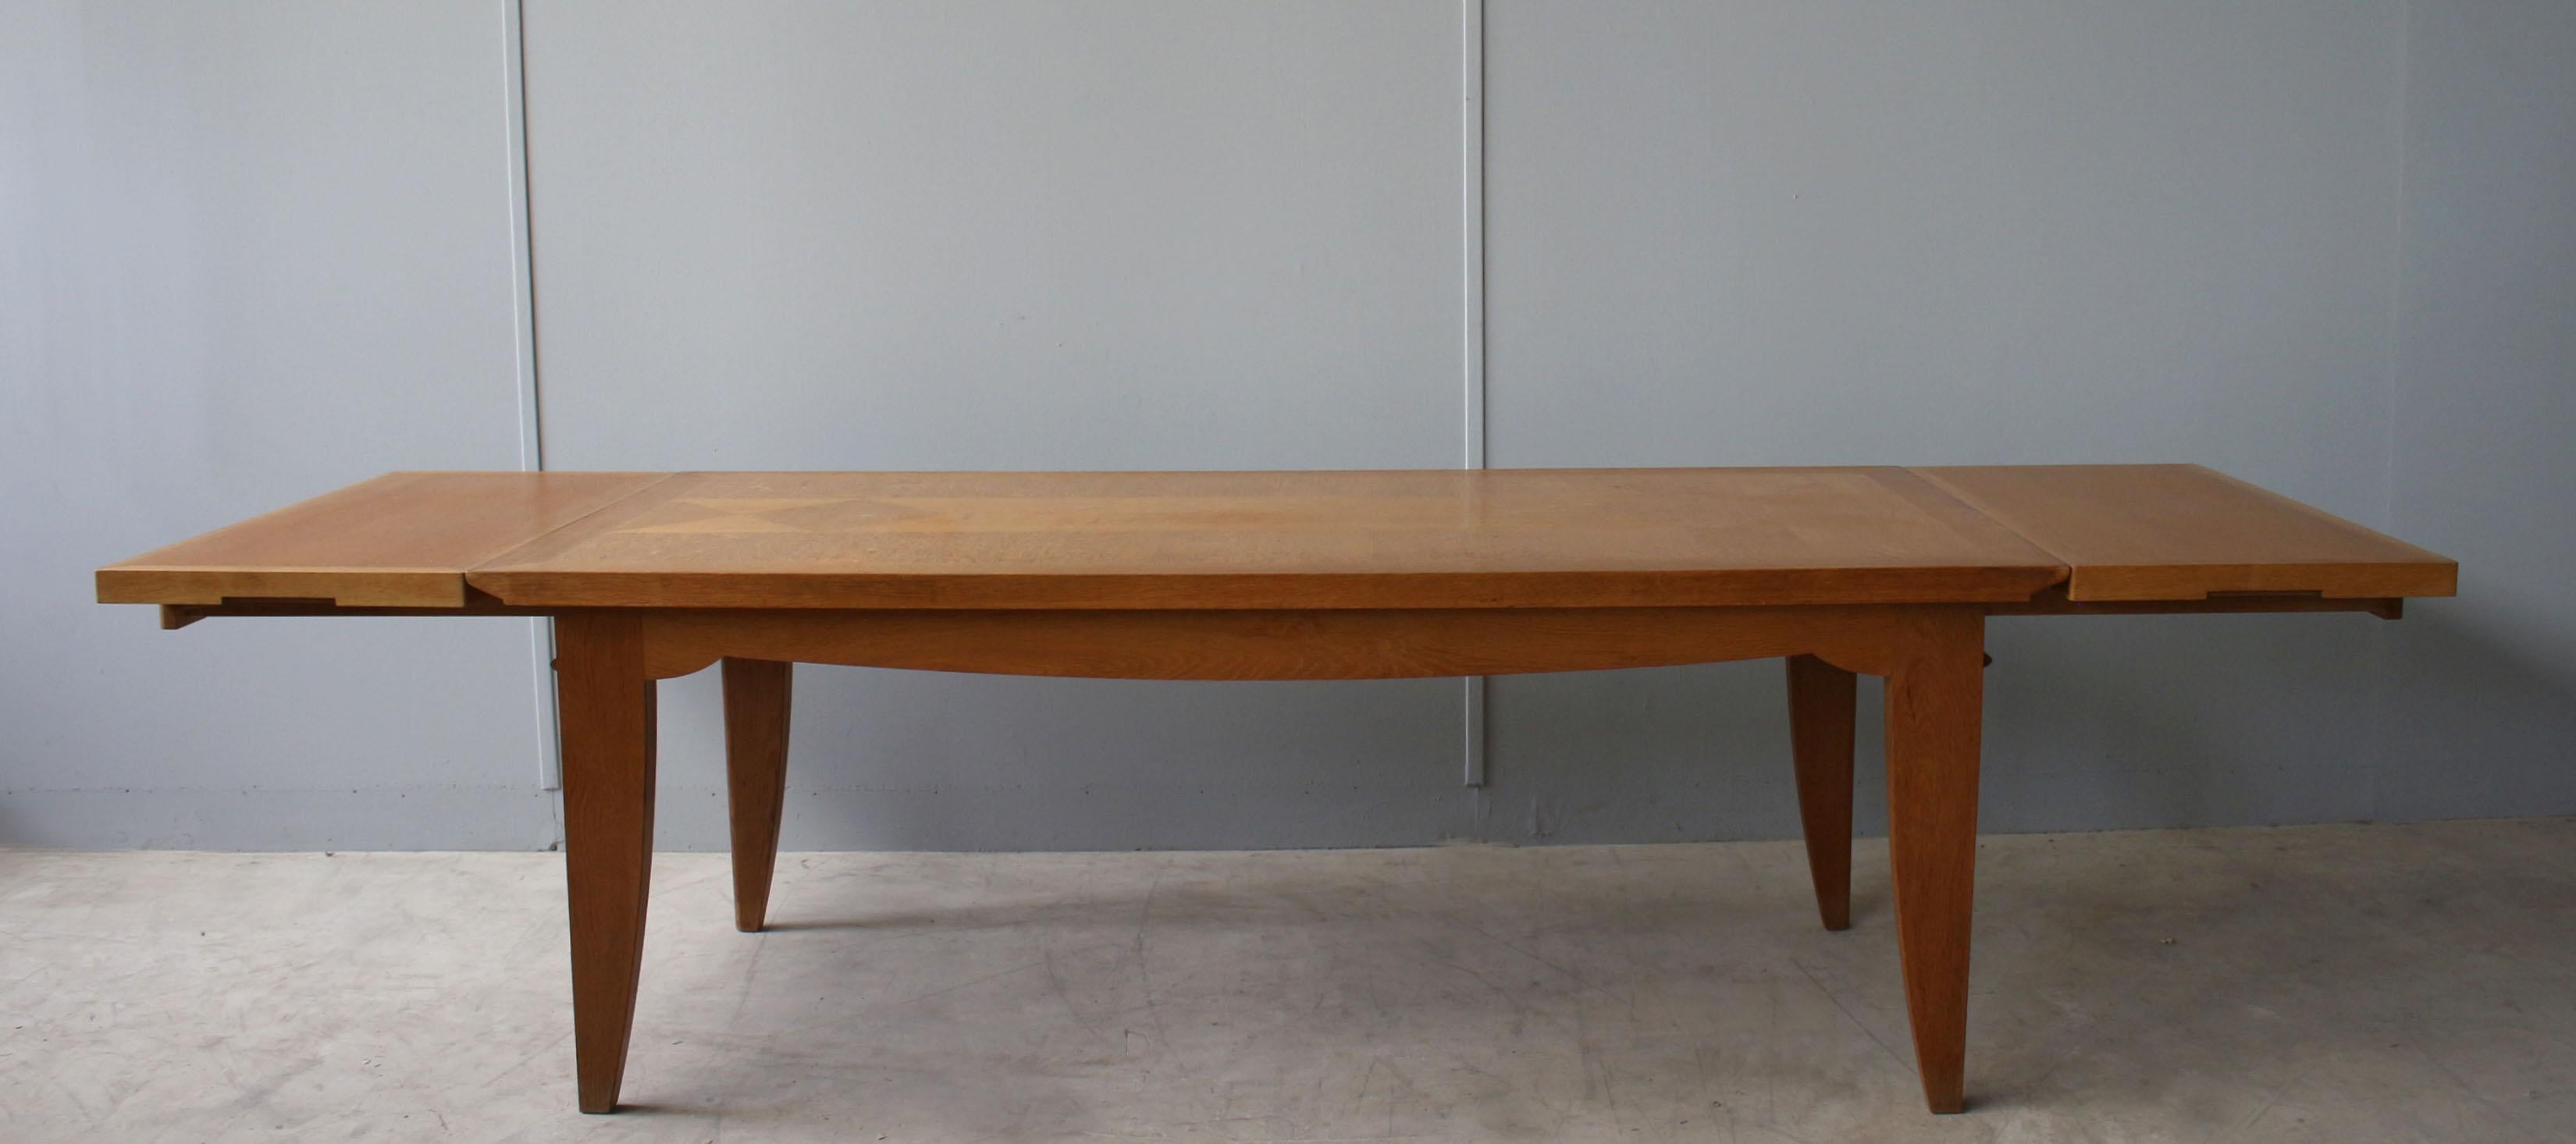 Fine French Art Deco Oak Table by P. Bloch and Charles Dudouyt  In Good Condition For Sale In Long Island City, NY